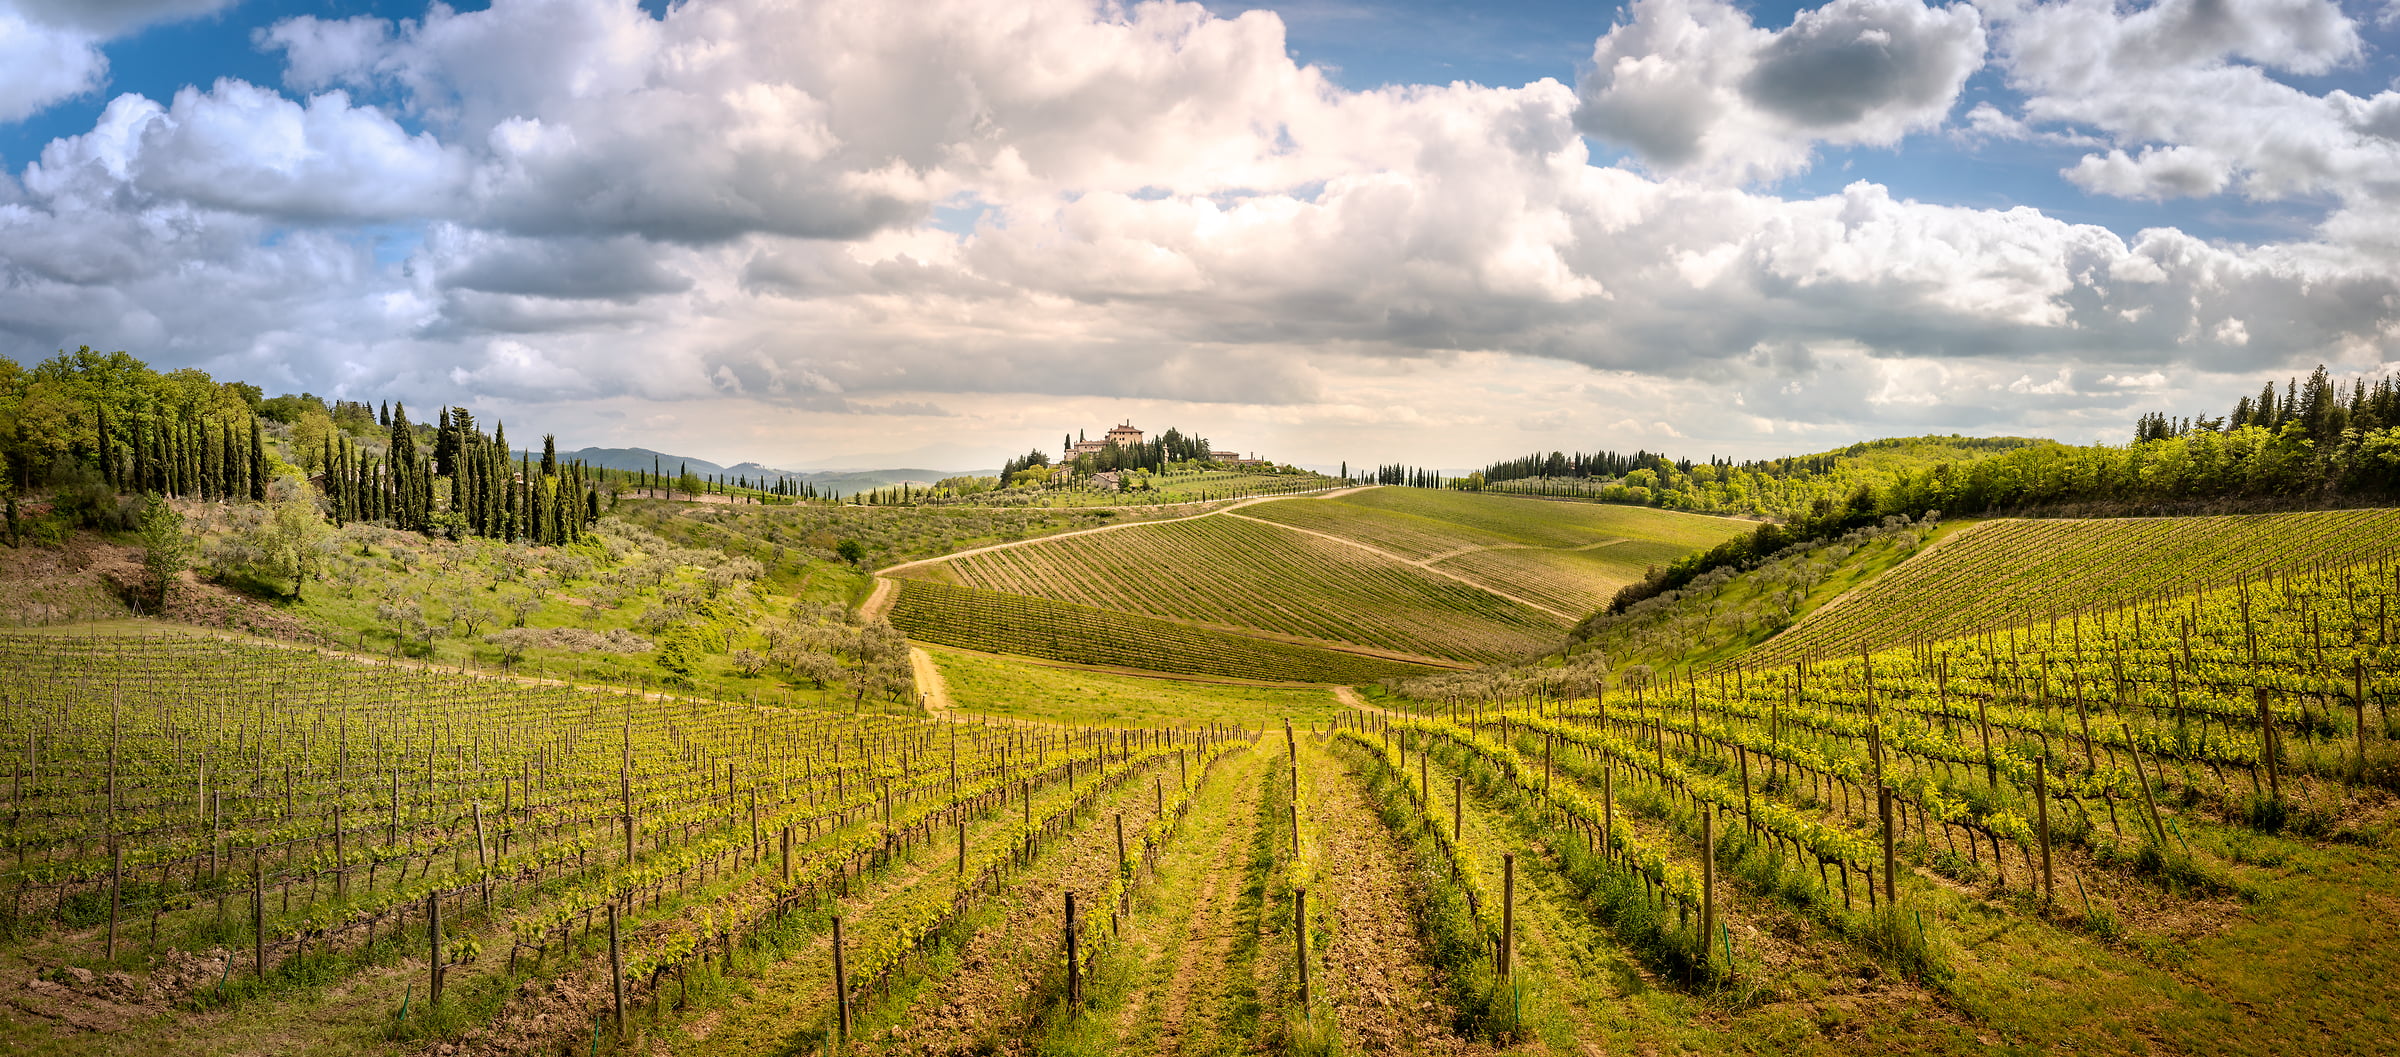 427 megapixels! A very high resolution, large-format VAST photo print of vinyards in Tuscany; photograph created by Justin Katz in Radda in Chianti, Tuscany, Italy.